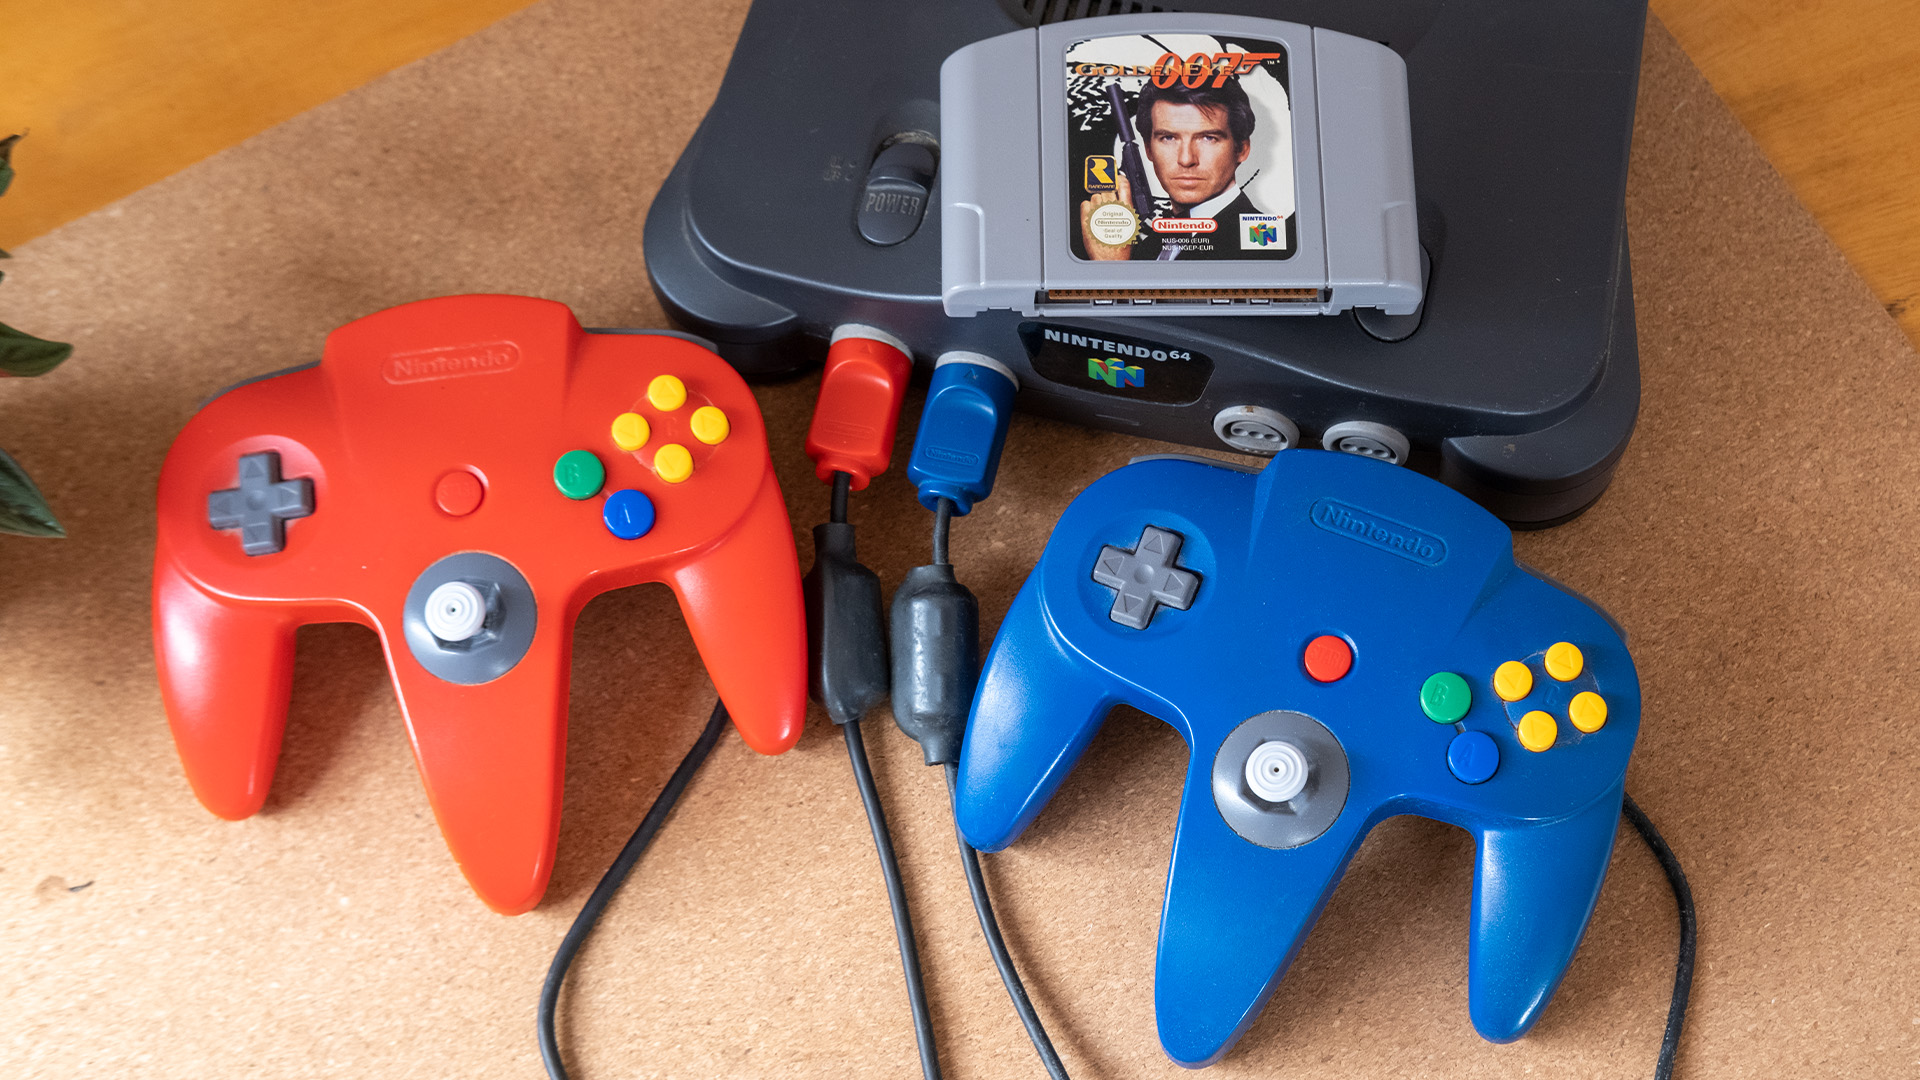 N64 controllers connected